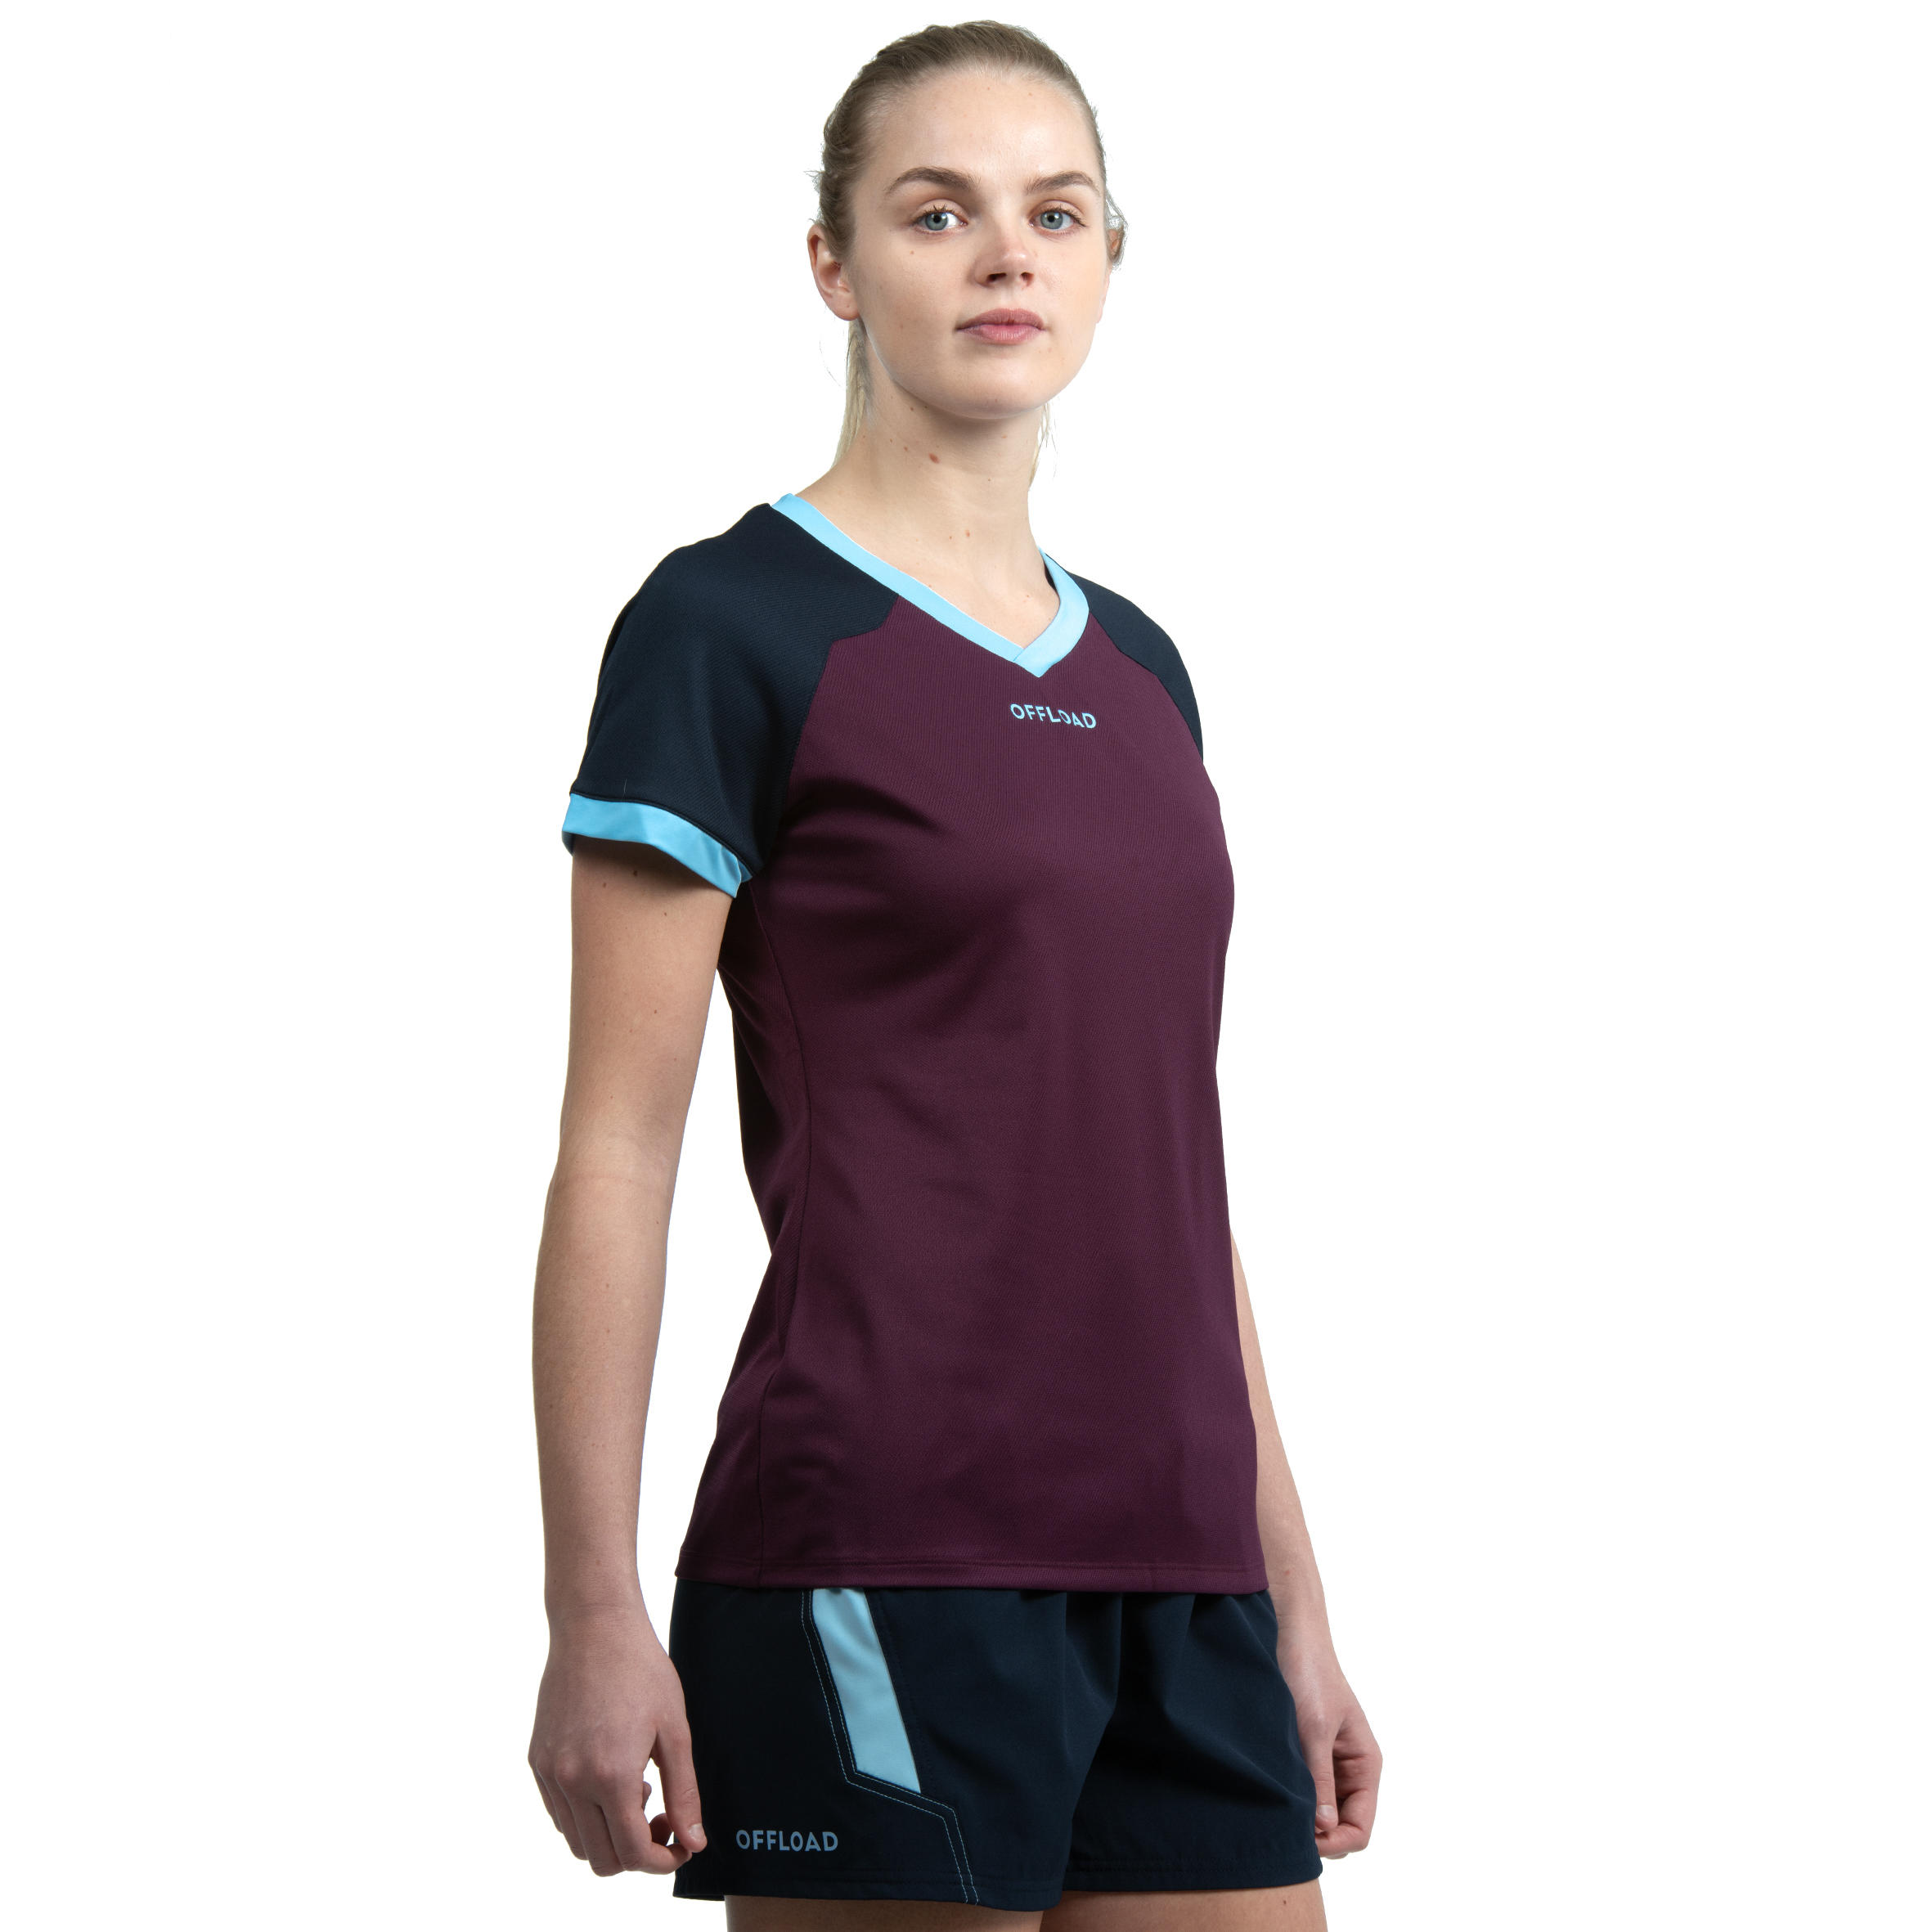 women's rugby jersey